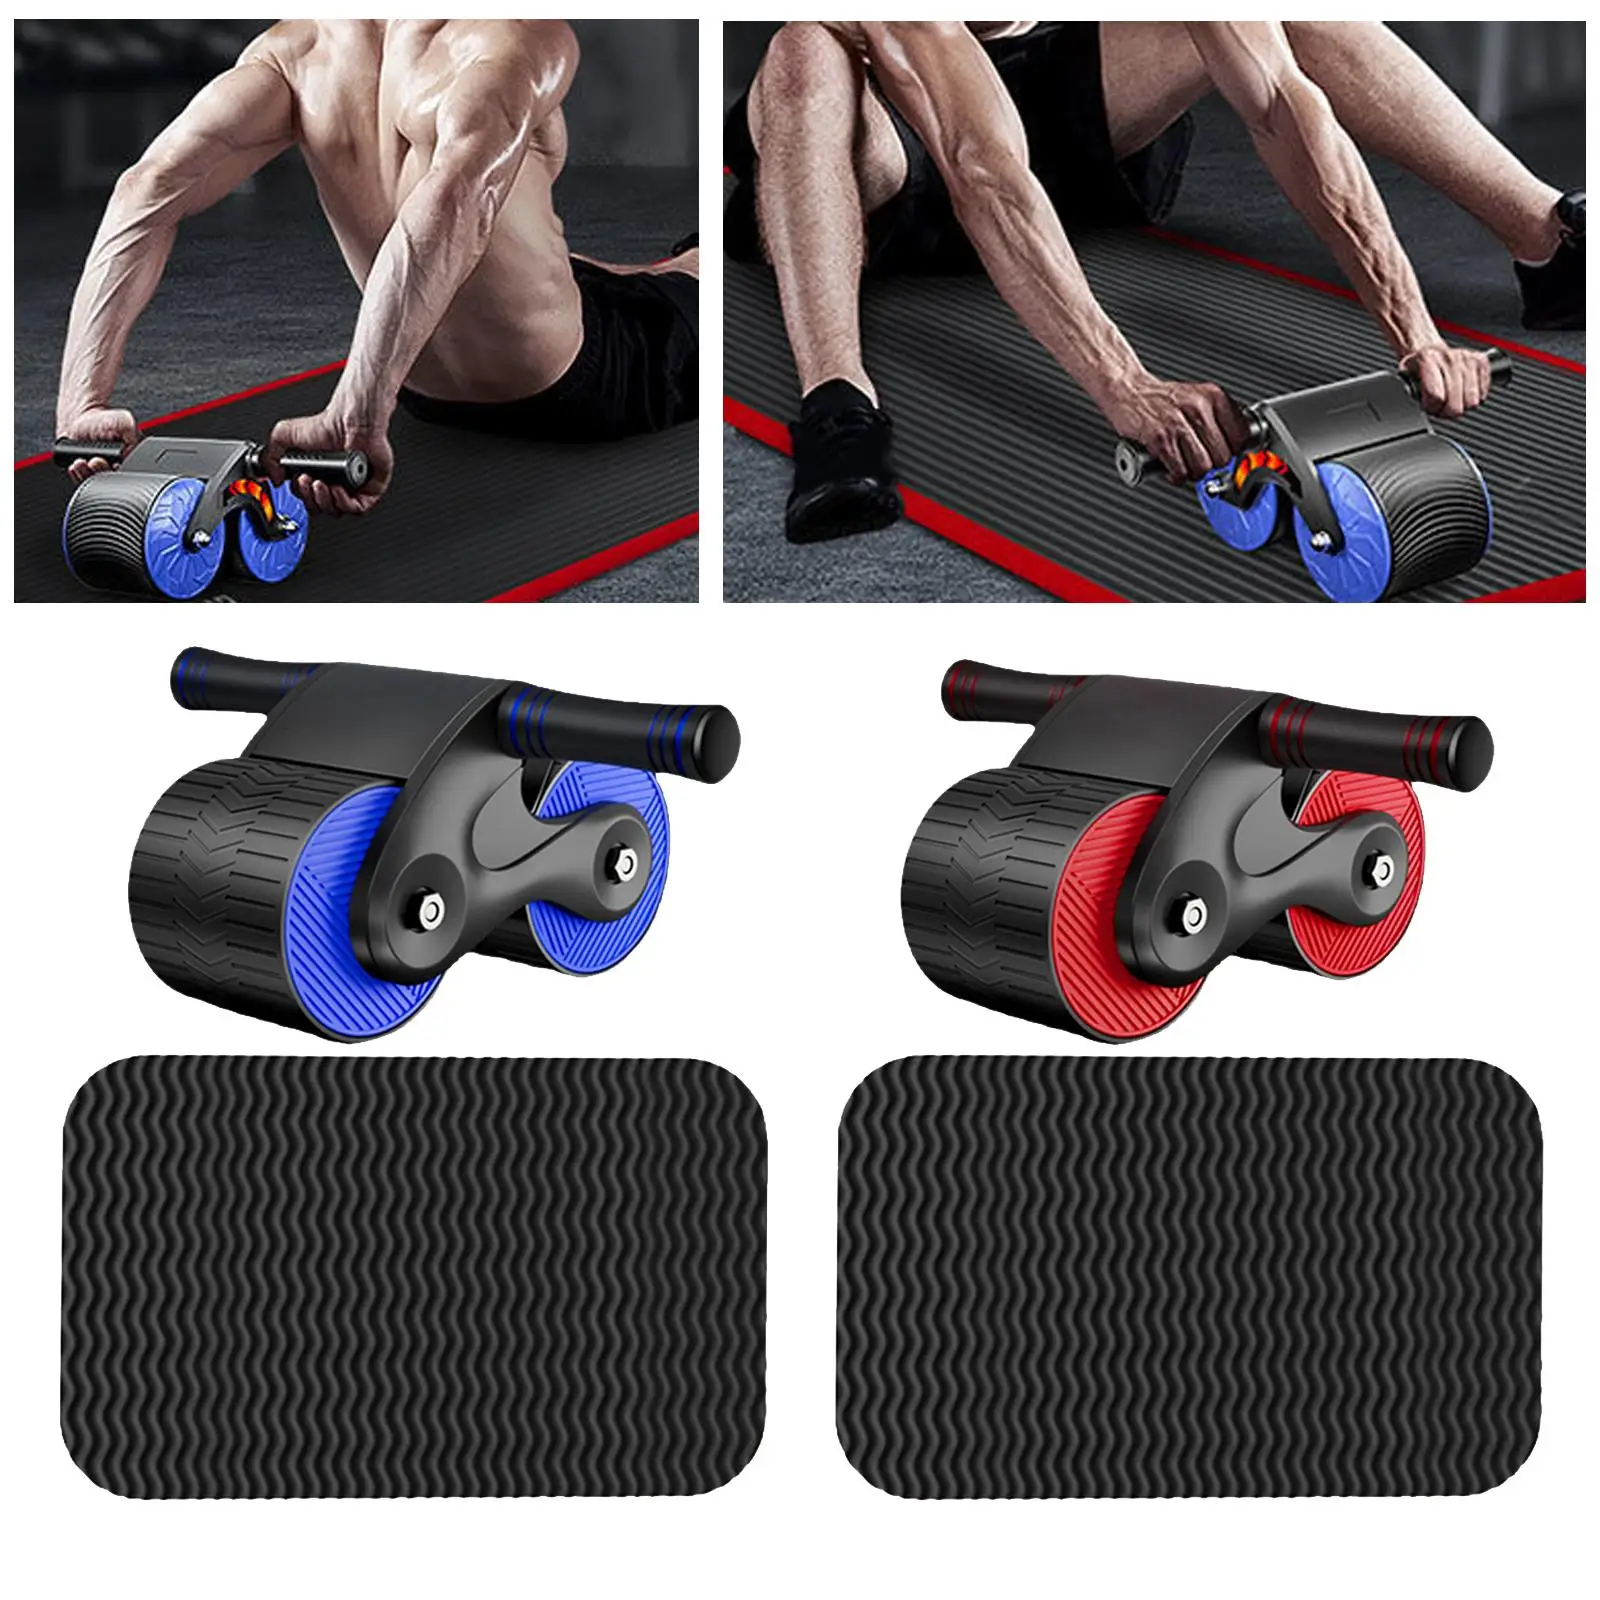 Abdominal Roller, Exercise Waist Trainer Devices Equipment Body Building Training Ab Double Wheel Roller for Home Workout